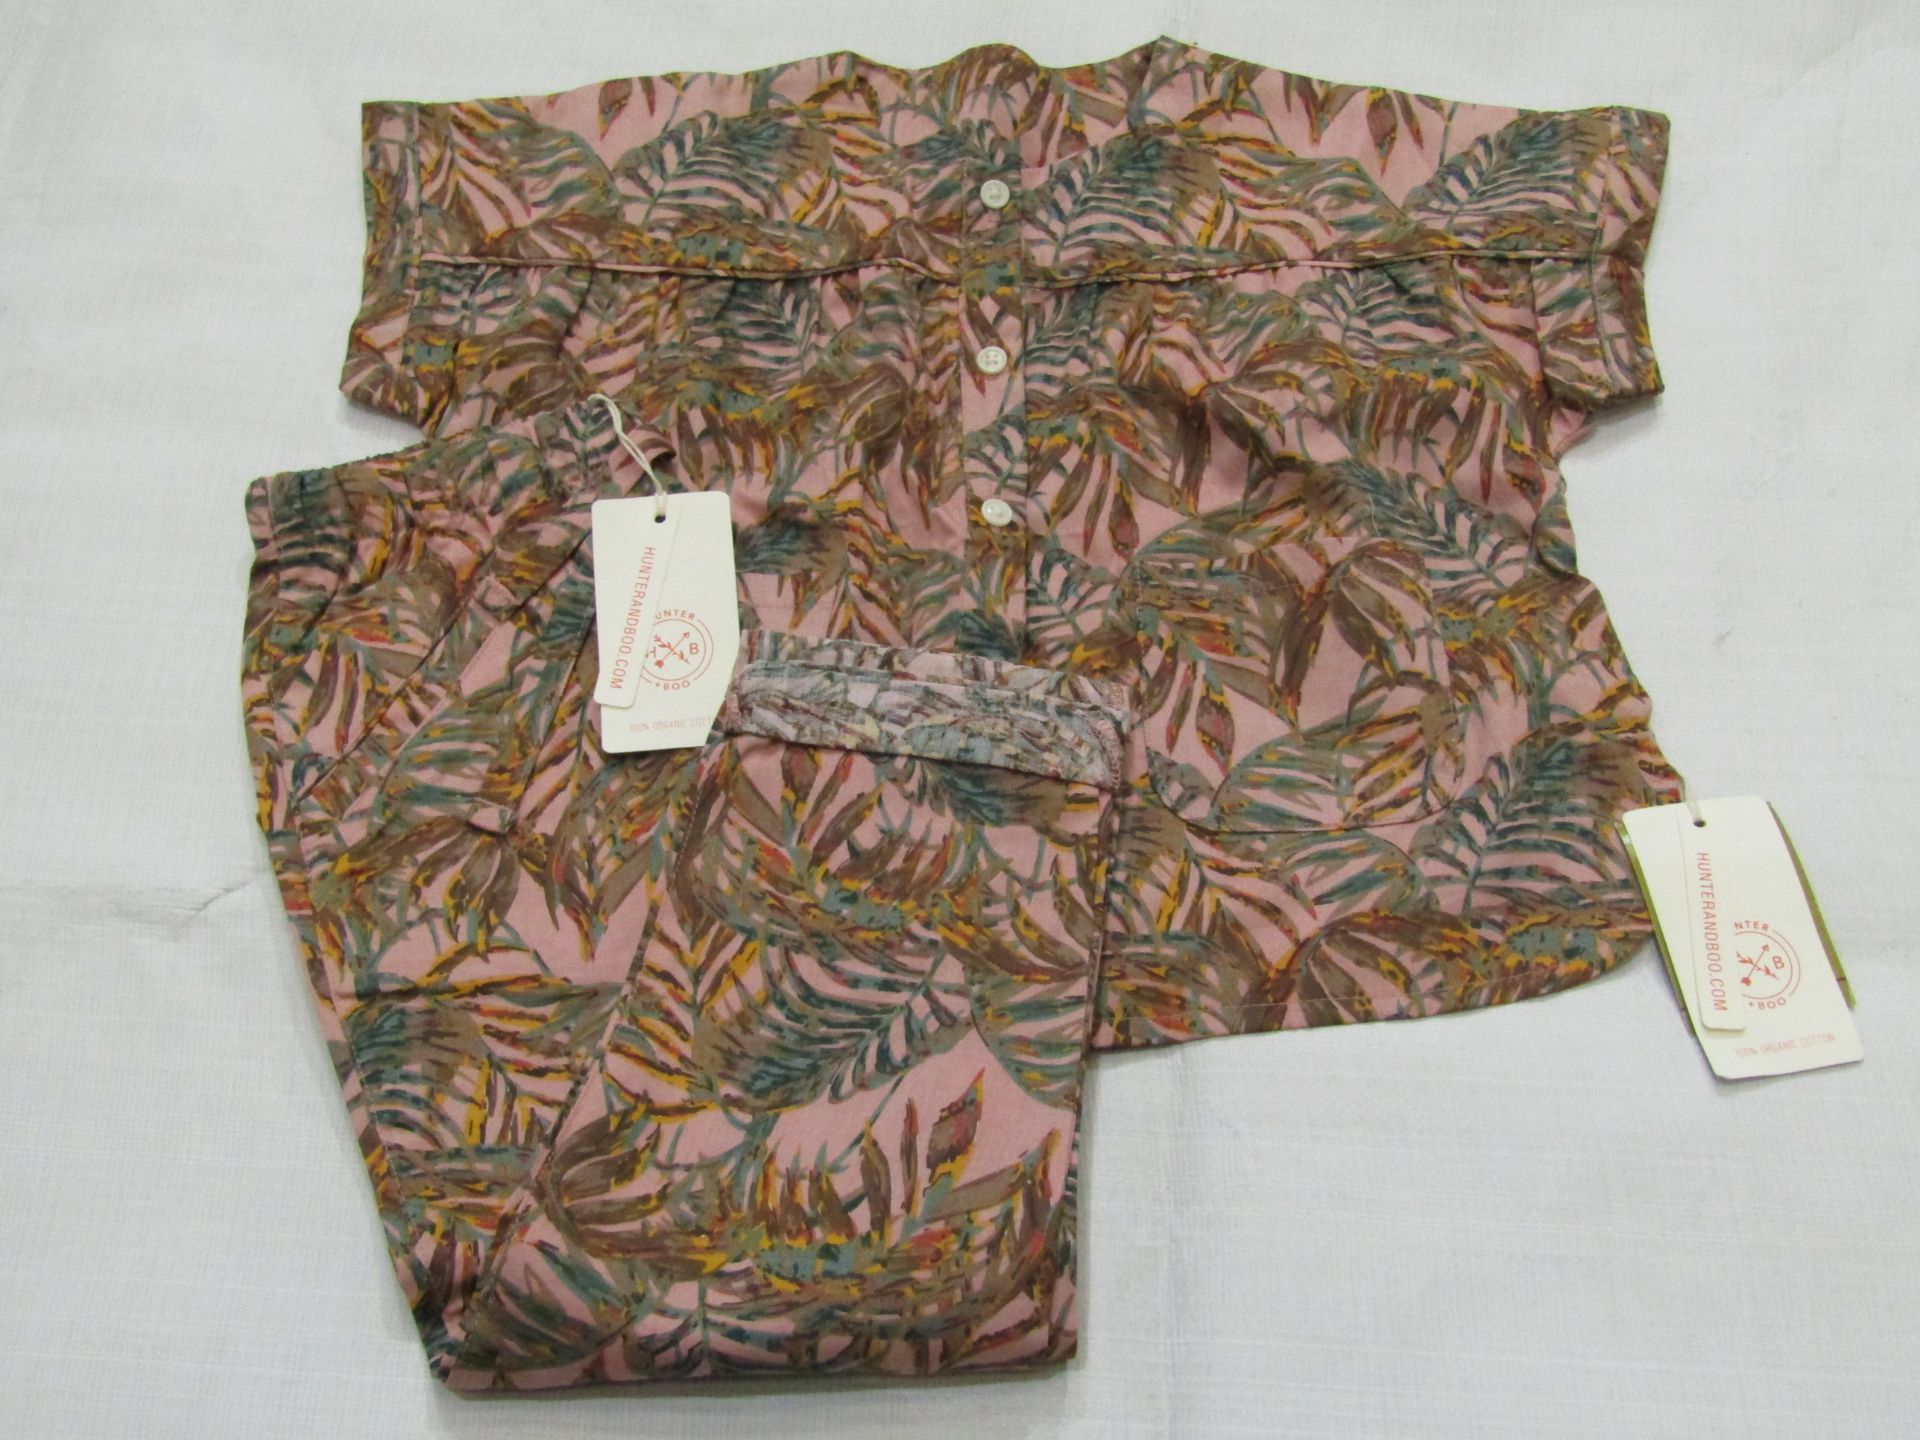 Hunter & Boo Nude Palawan Blouse & Trouser Aged 3-4 yrs New & Packaged RRP £42